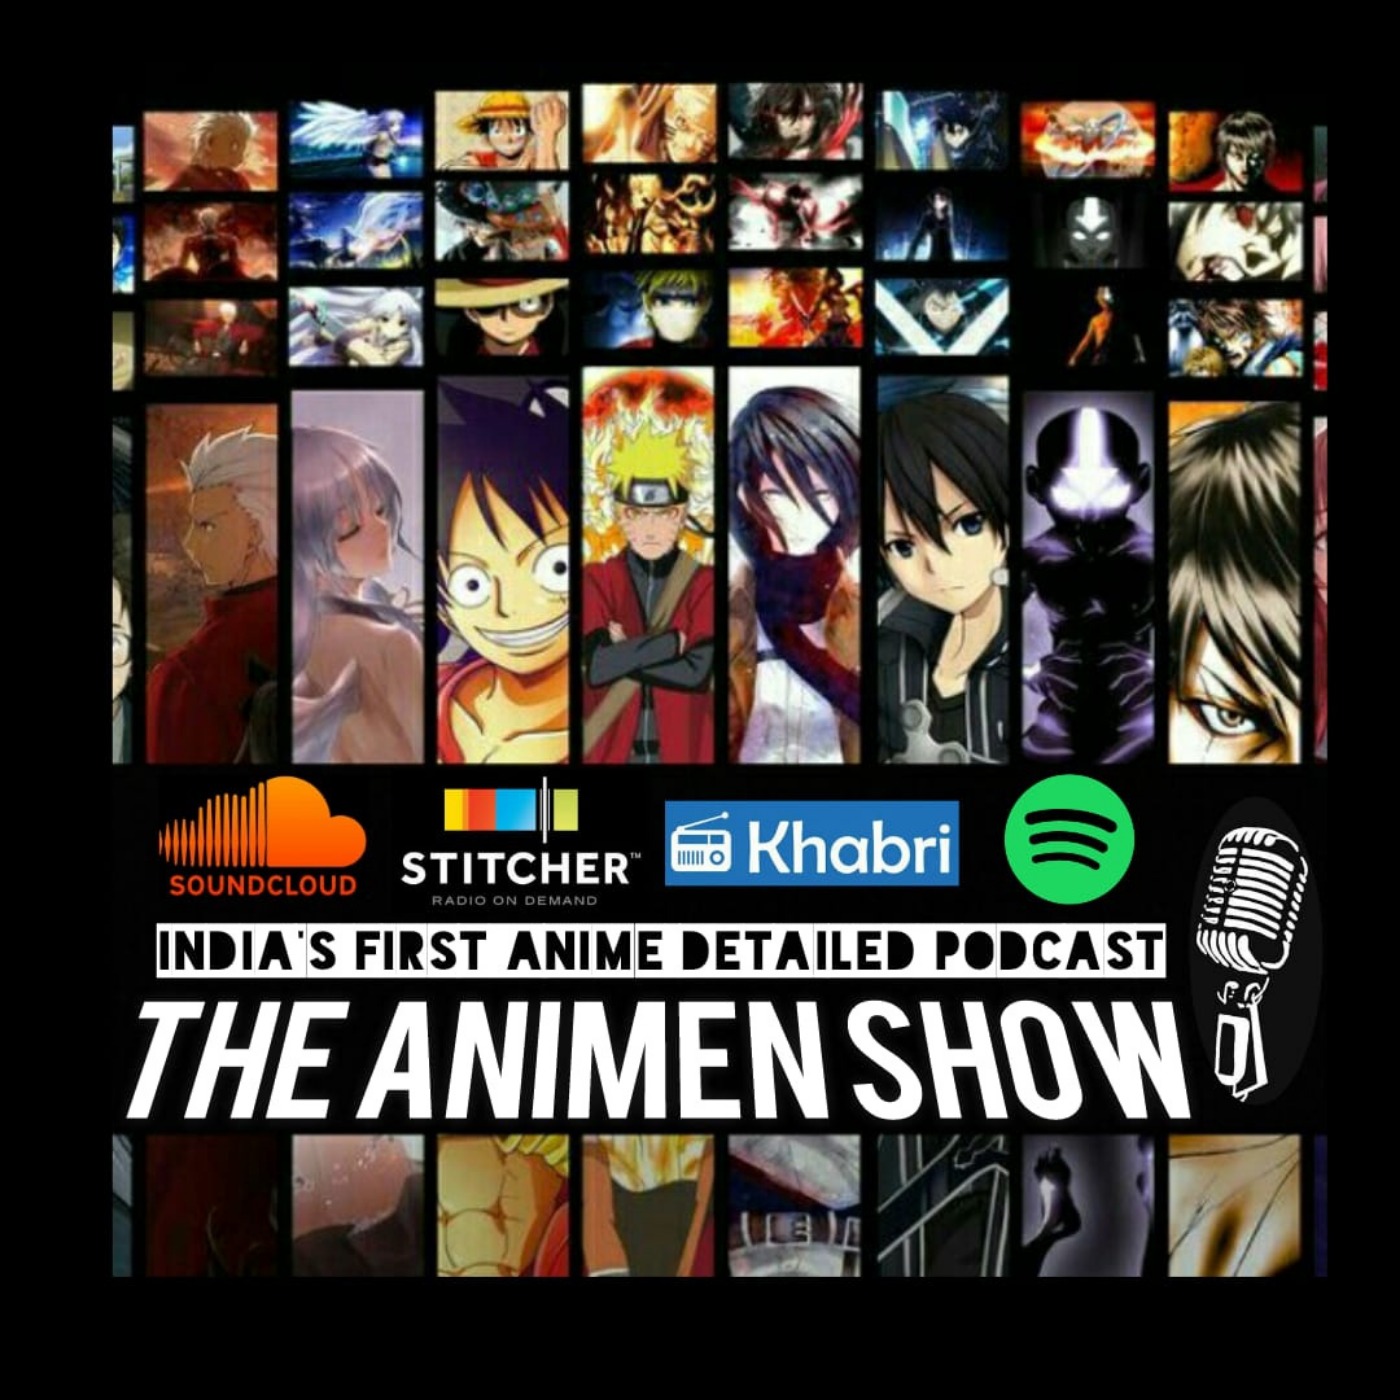 THE ANIMEN SHOW | RedCircle